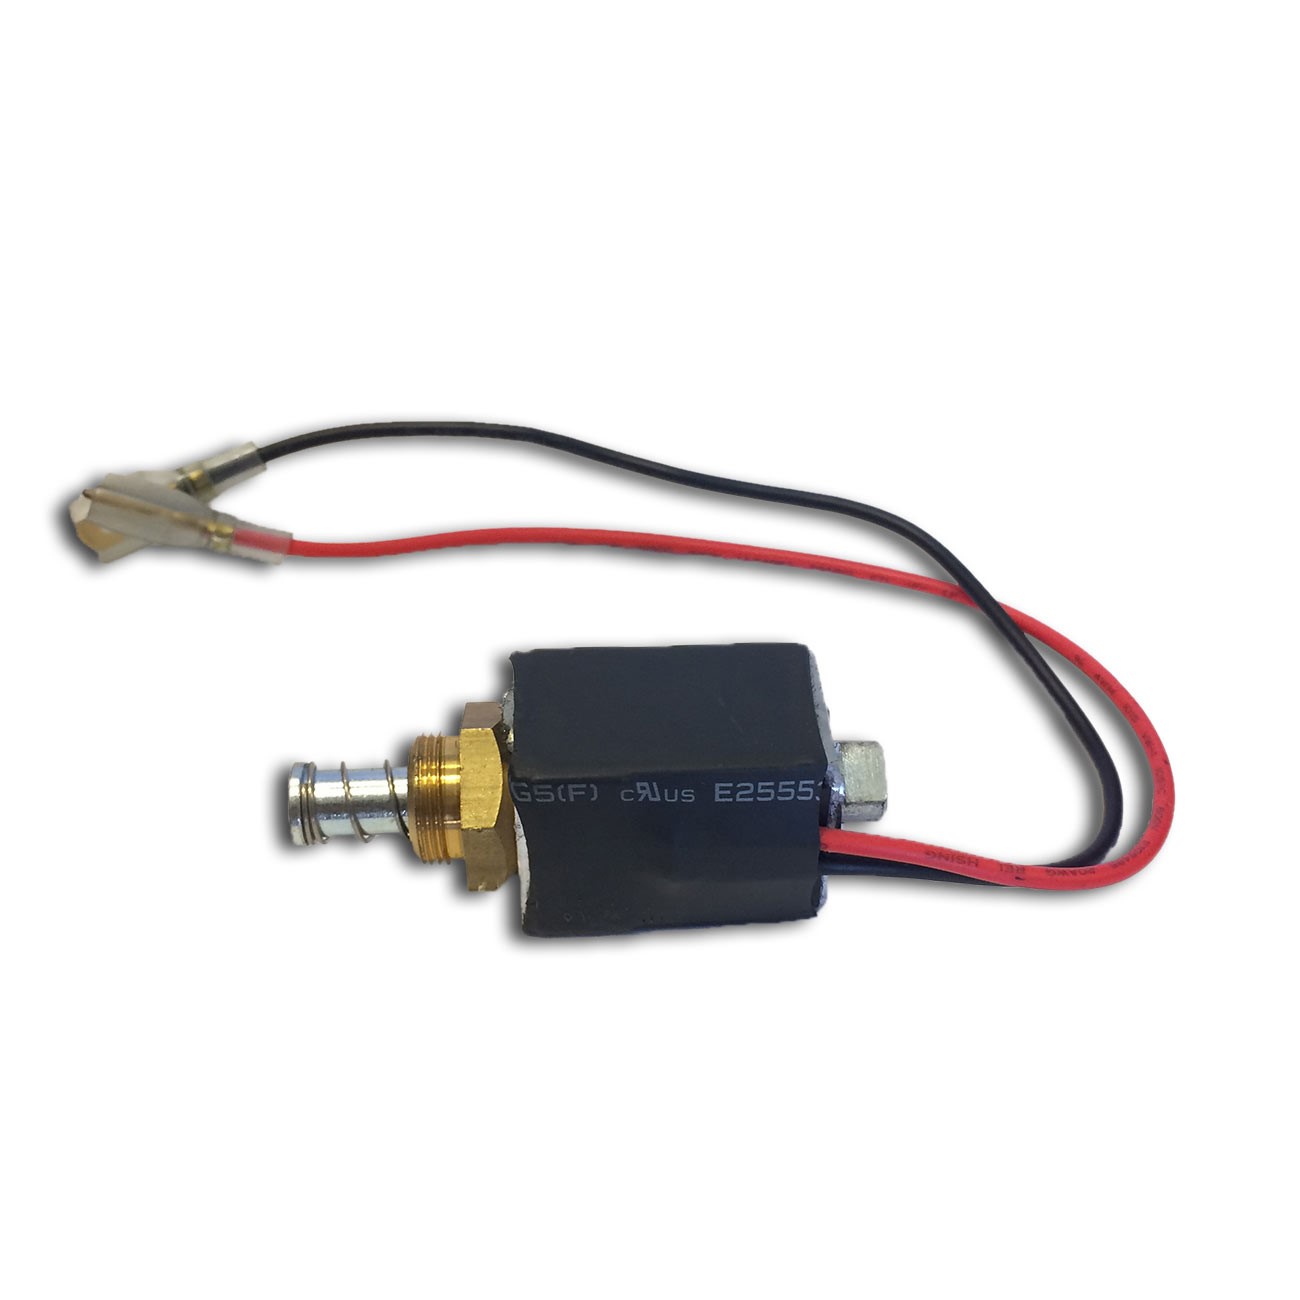 Fireplace thermocouple Lovely solenoid for Remote Controlled Fireplaces 32rt Series